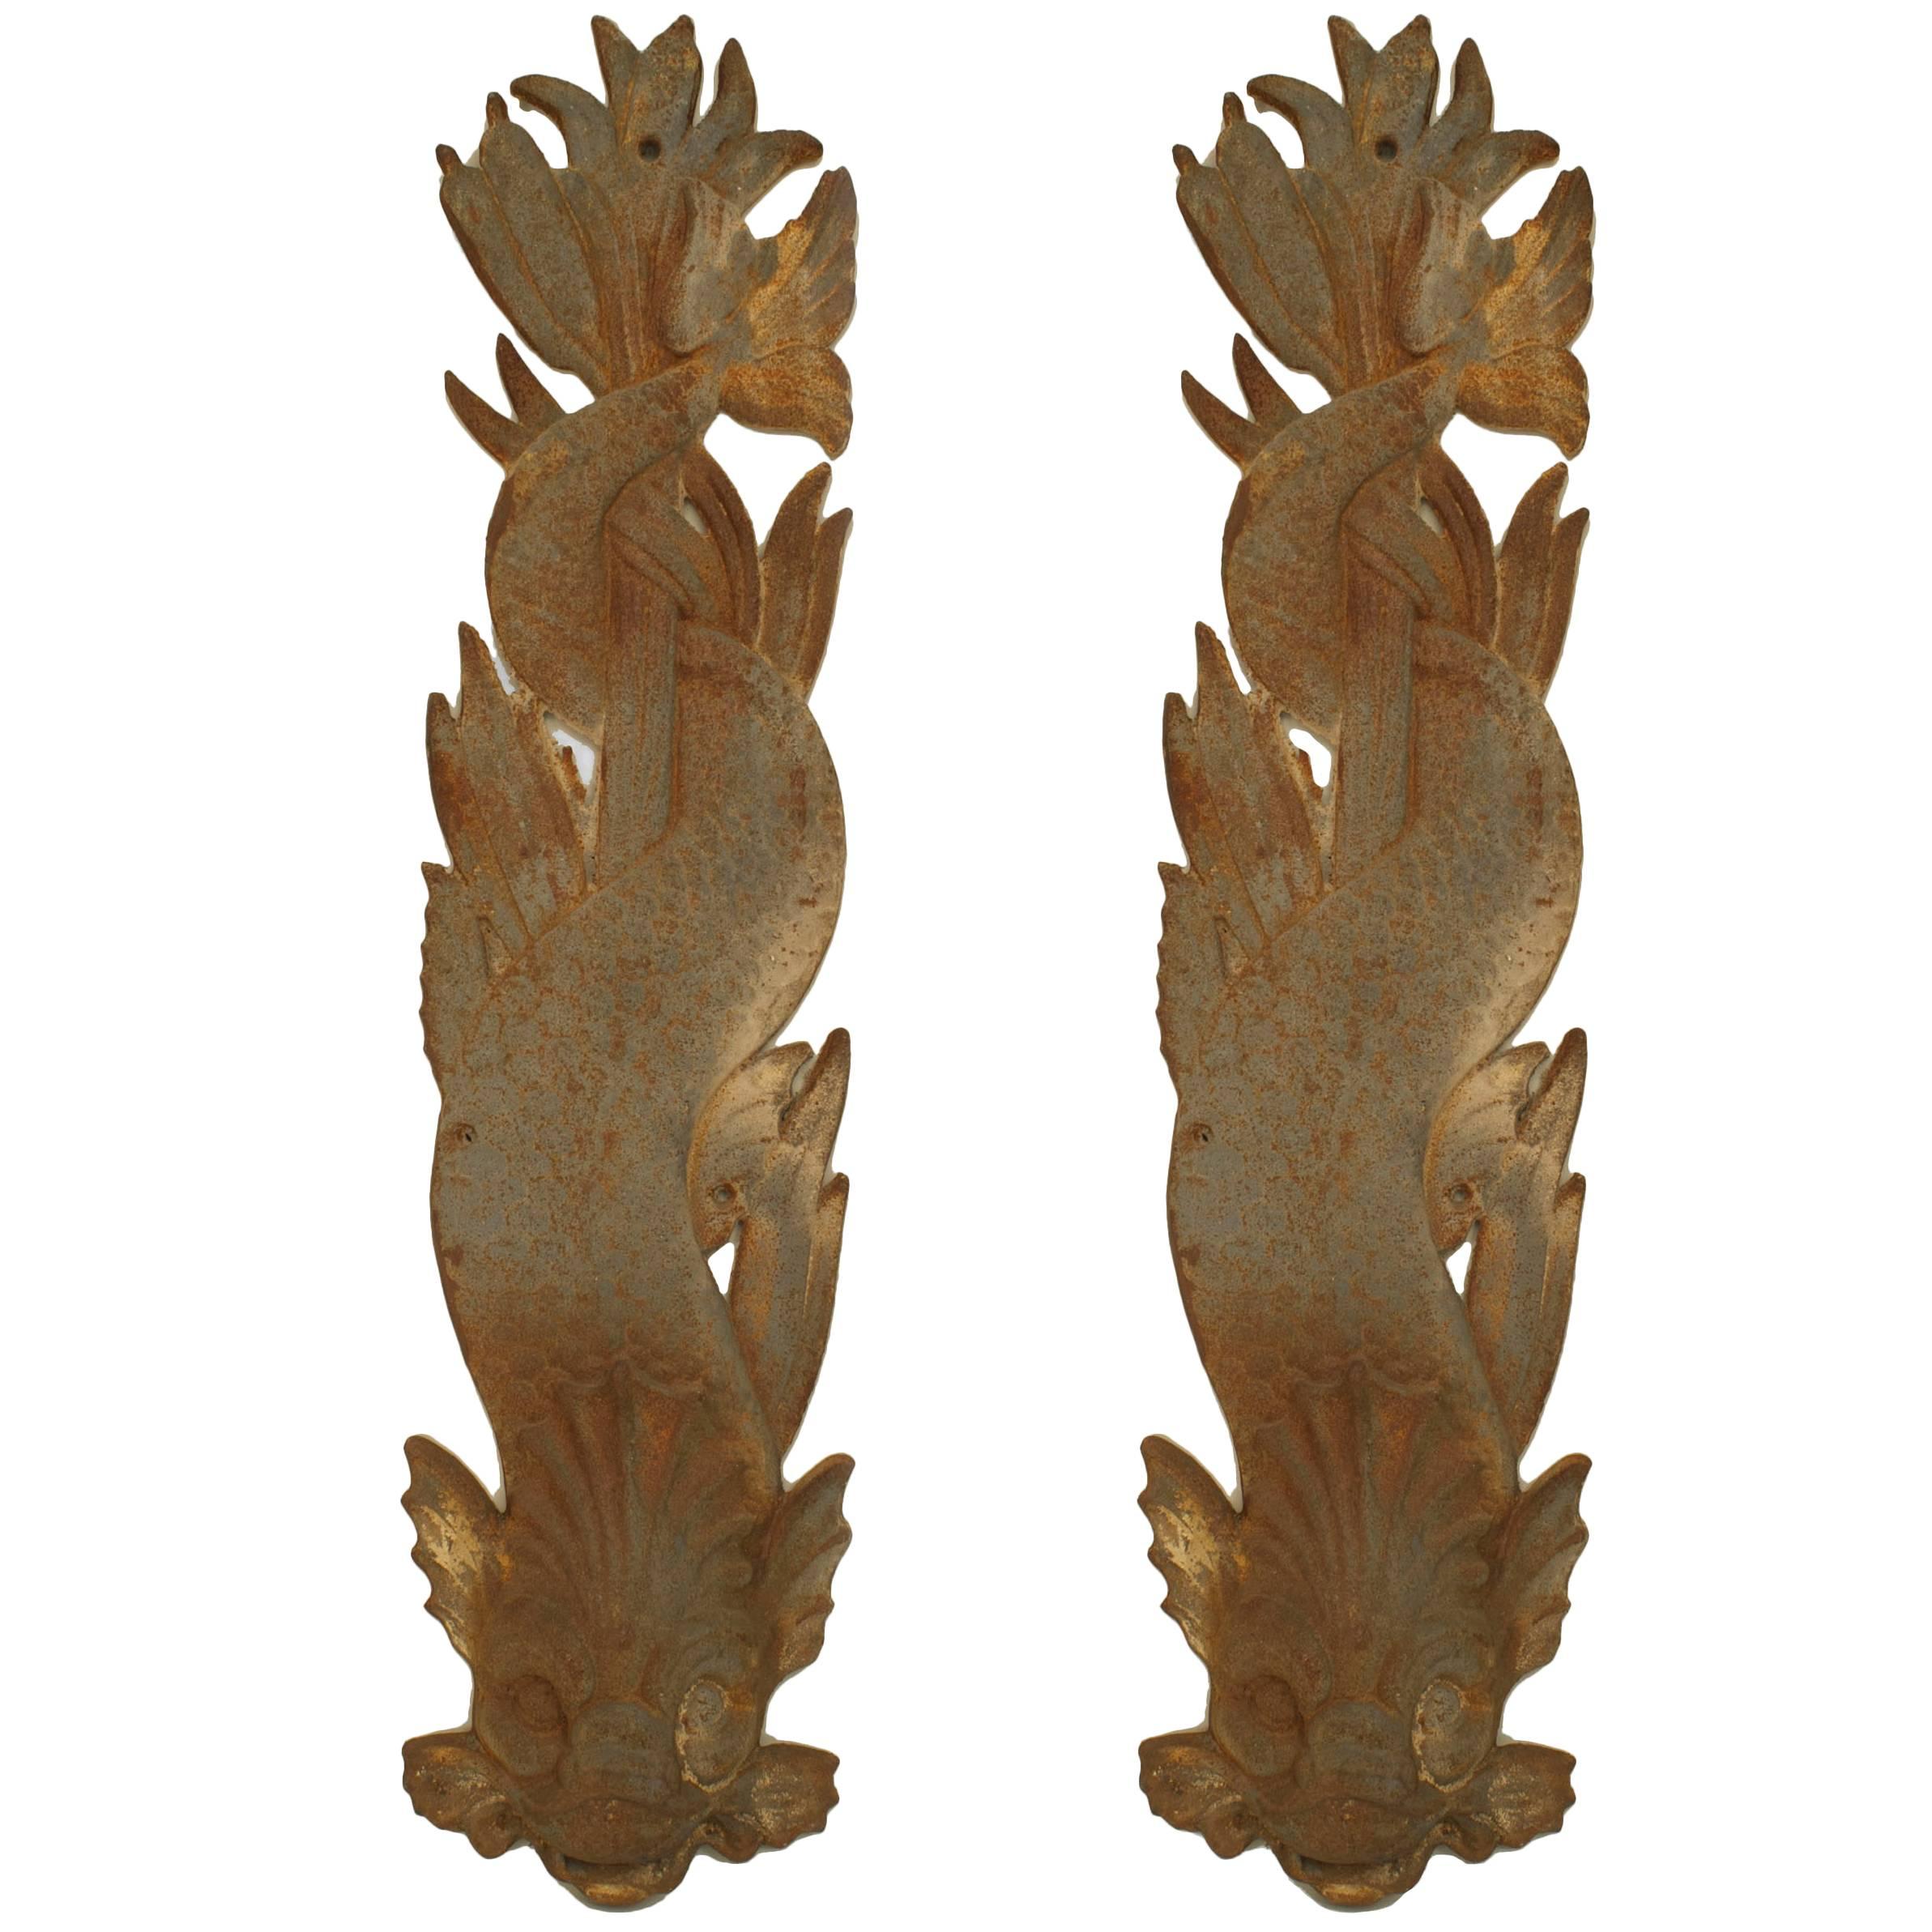 Pair of Outdoor Italian Neo-Classic Iron Wall Plaques